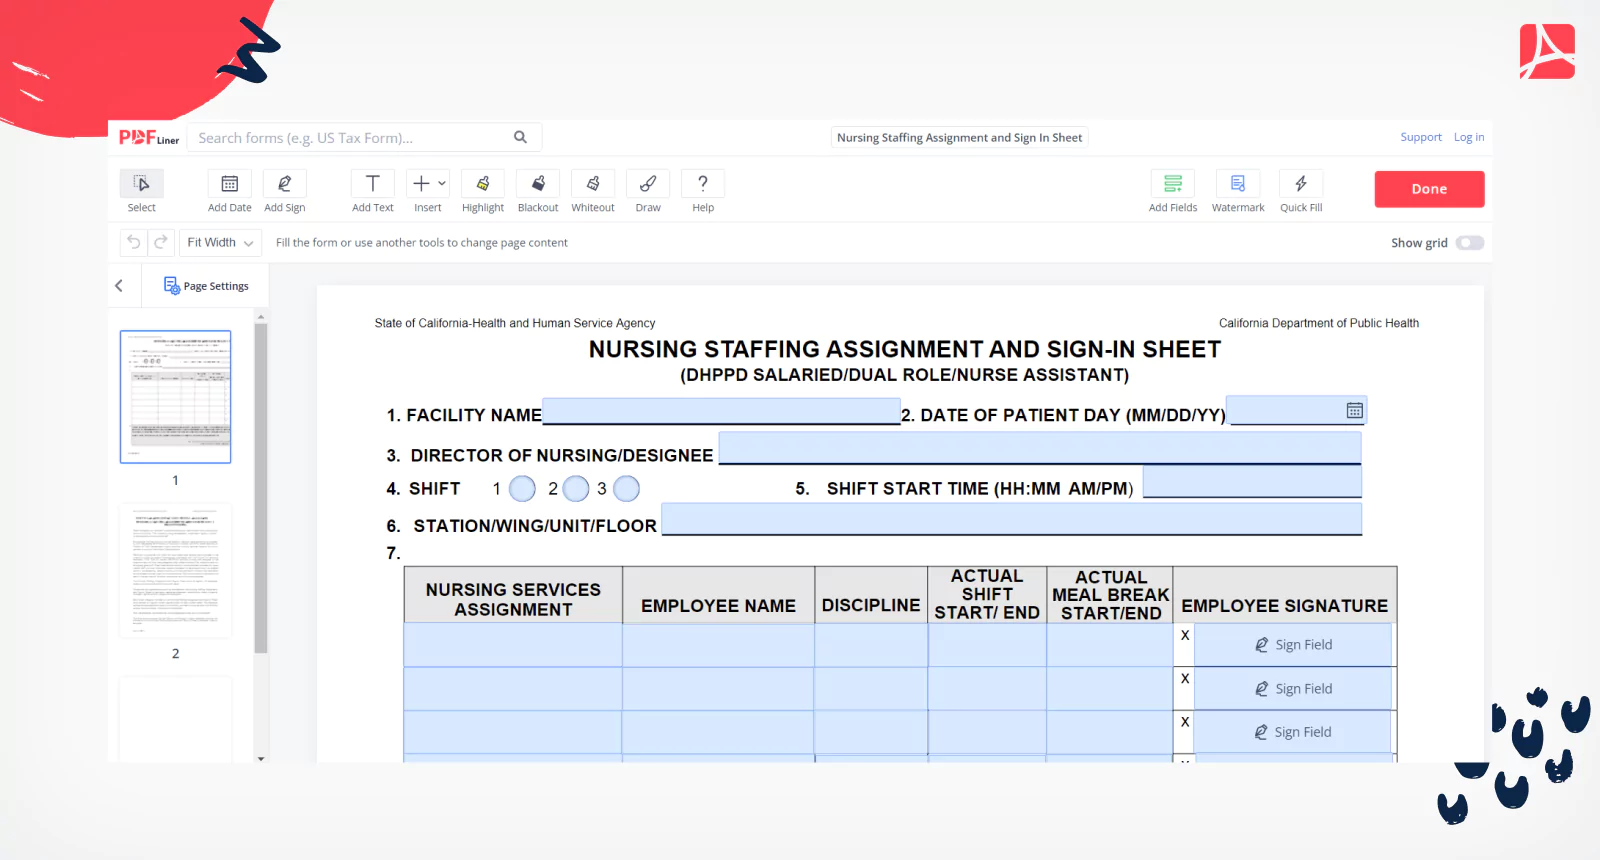 Nursing Staffing Assignment and Sign In Sheet on PDFLiner